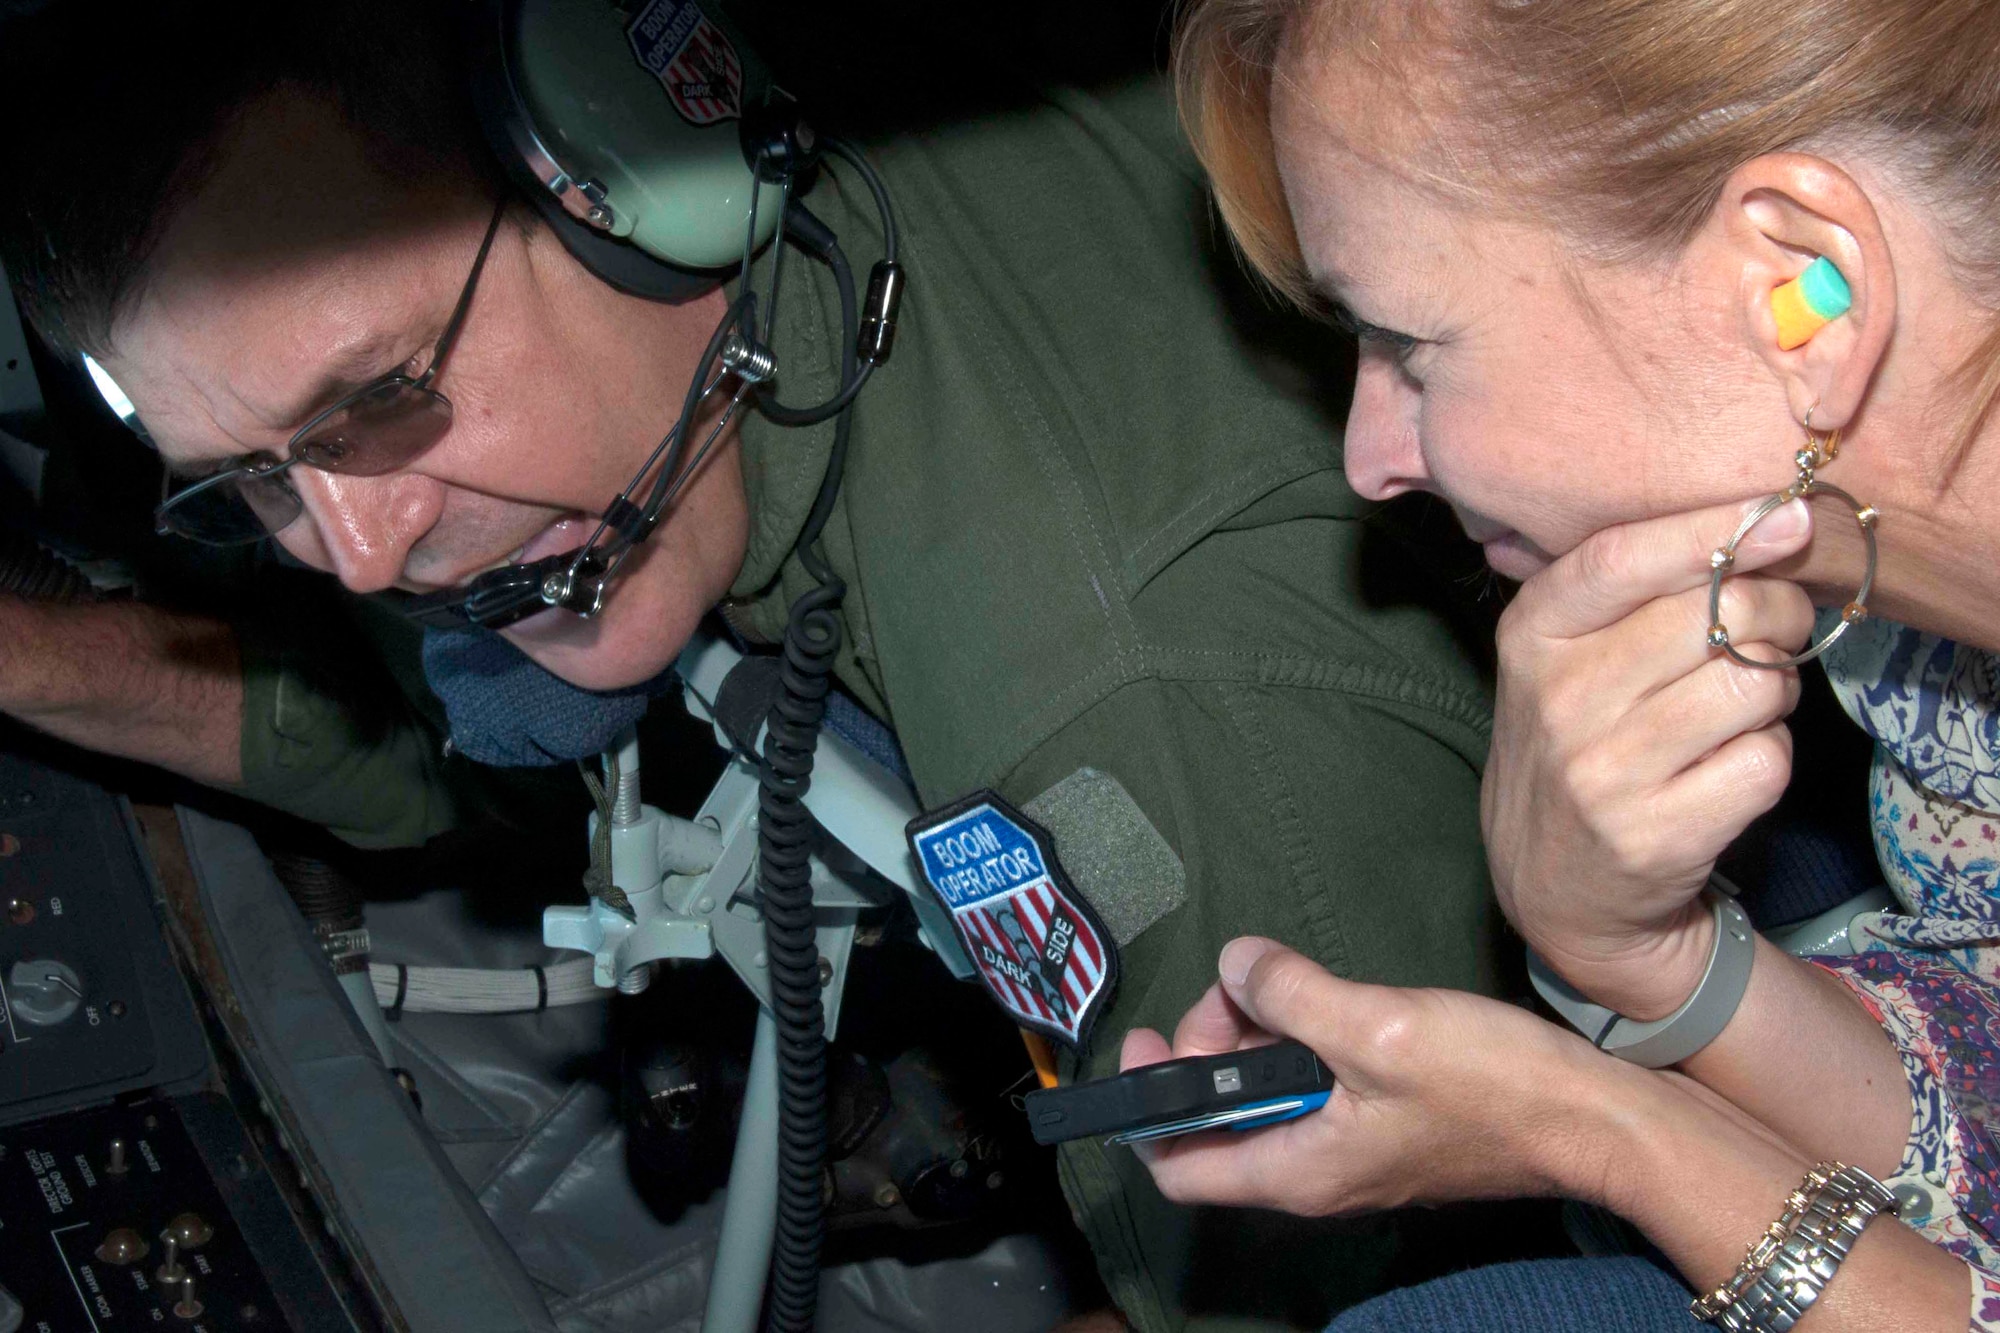 U.S. Air Force Chief Master Sgt. Jeff Henry, a boom operator from the 434th Air Refueling Wing, Grissom Air Reserve Base, Ind., answers a question from Rachel Thrasher prior to refueling a B-52 Stratofortress May 14, 2016.  Thrasher took part in the Employer Appreciation Day hosted by the 307th Bomb Wing, Barksdale Air Force Base, La.  The event is designed to teach employers about the Air Force Reserve and the 307th BW.  (U.S. Air Force photo by Tech. Sgt. Ted Daigle/released)